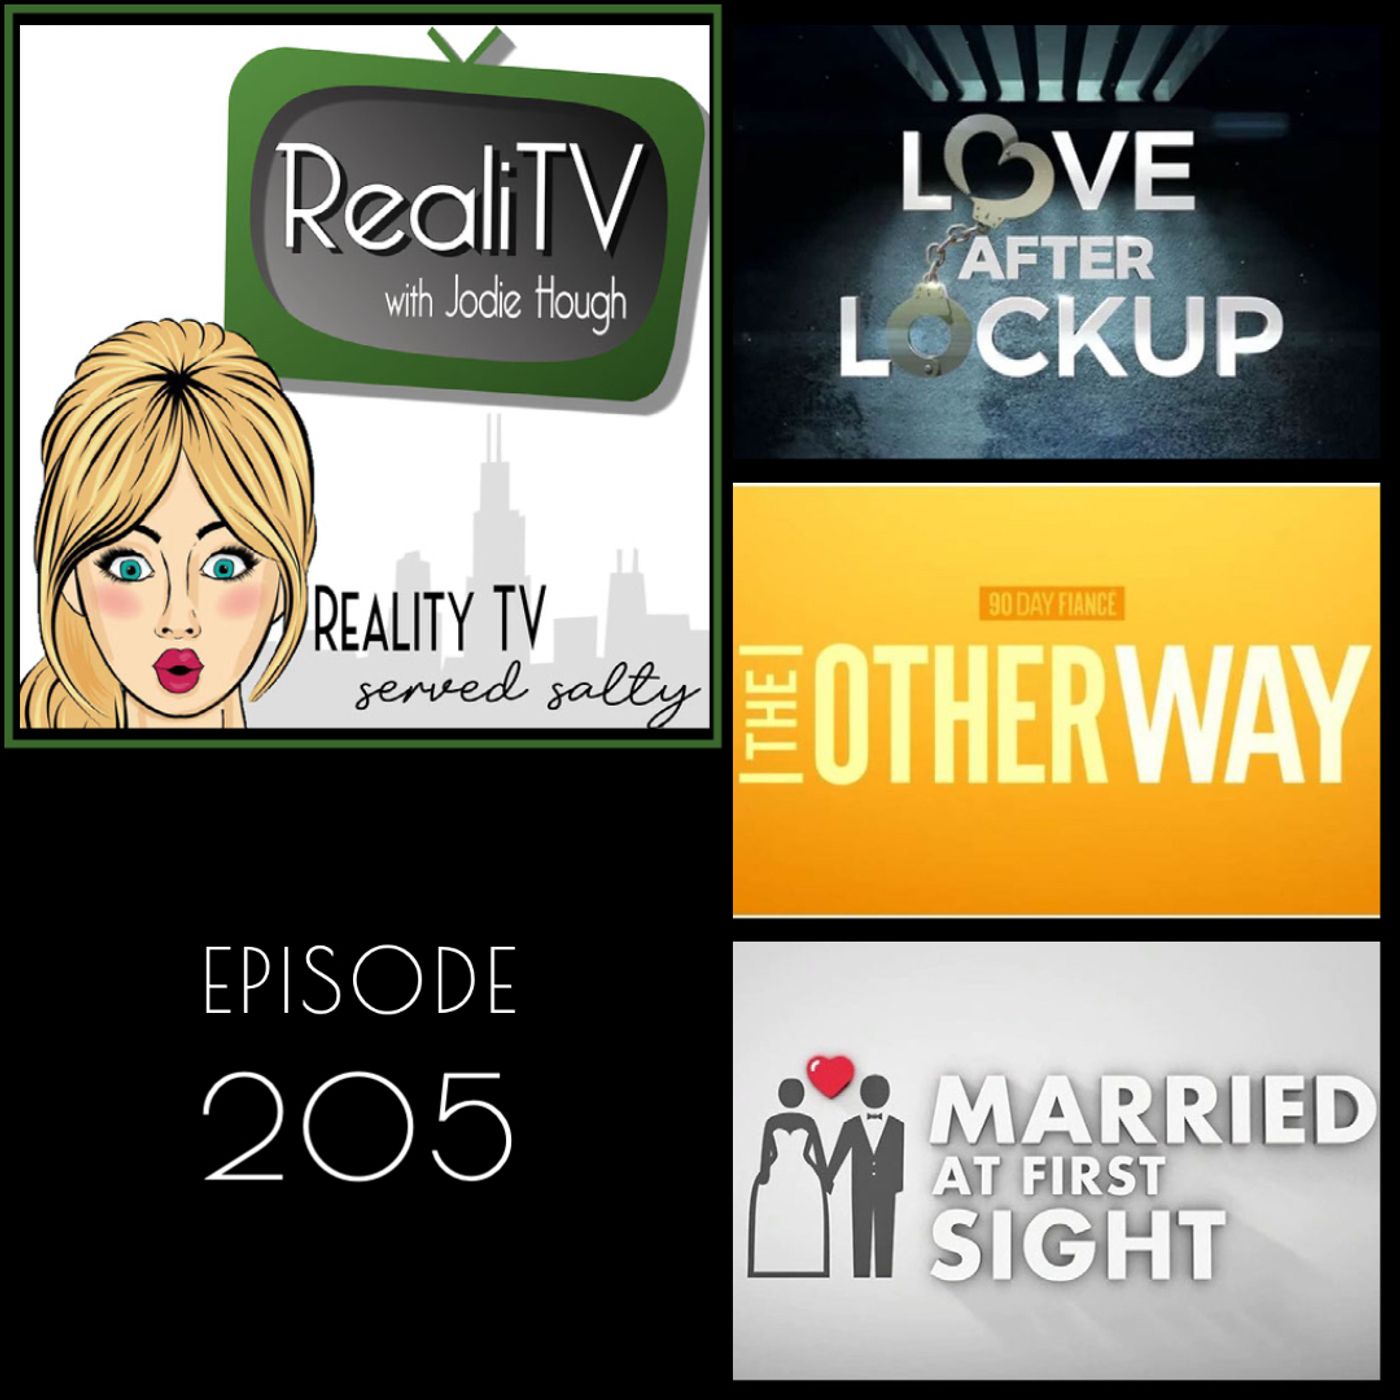 205: 90 Day Fiance, Love After Lockup & Married at First Sight